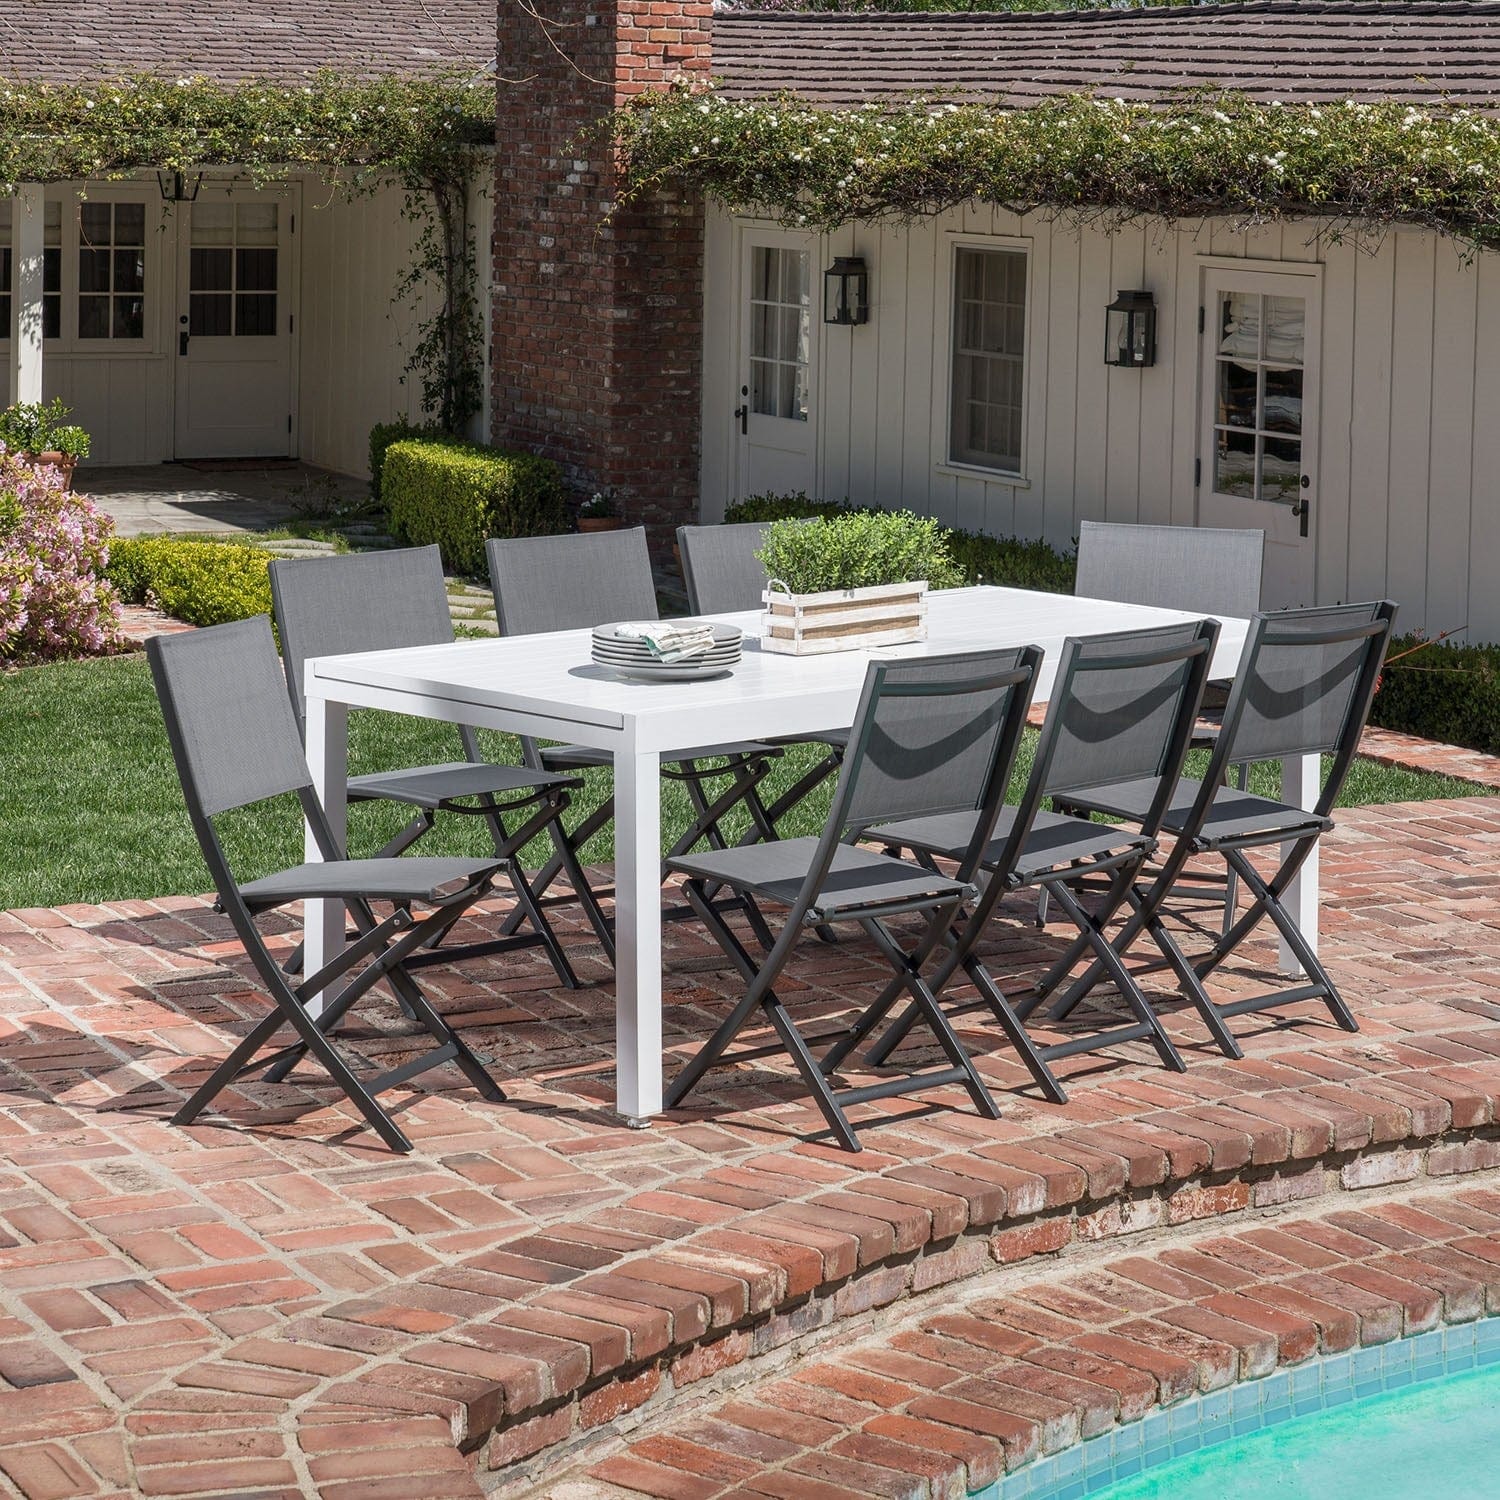 Hanover Outdoor Dining Set Hanover Del Mar 9 Piece Outdoor Dining Set with 8 Folding Sling Chairs in Gray and a White 40" x 118" Expandable Dining Table | DELDN9PCFD-WG